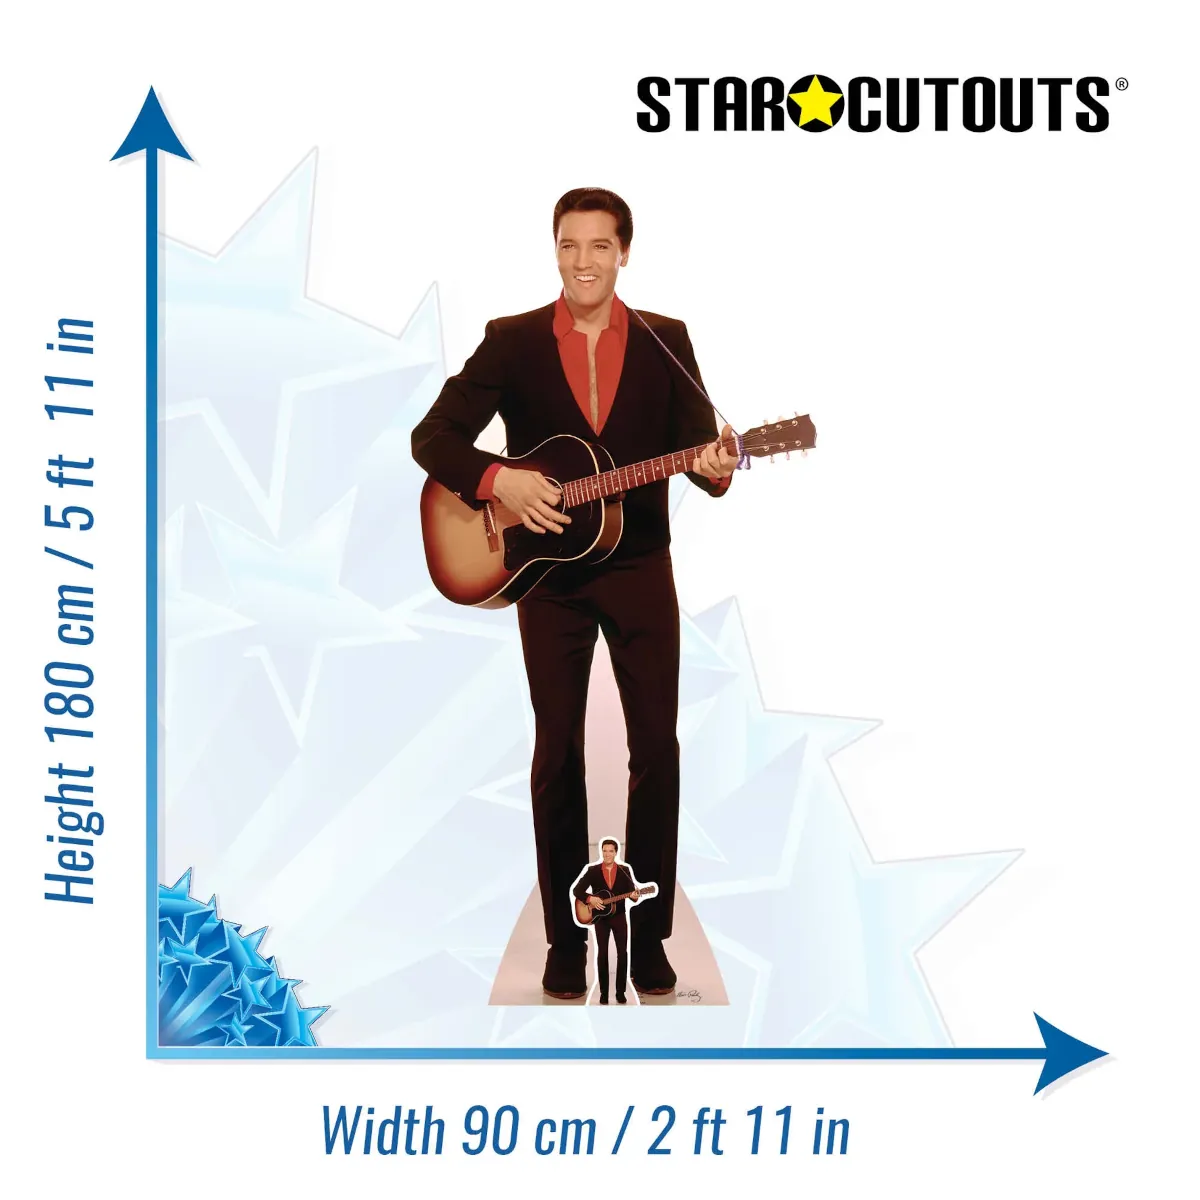 SC241 Elvis Presley 'Red Shirt & Guitar' (American Singer) Official Lifesize + Mini Cardboard Cutout Standee Size